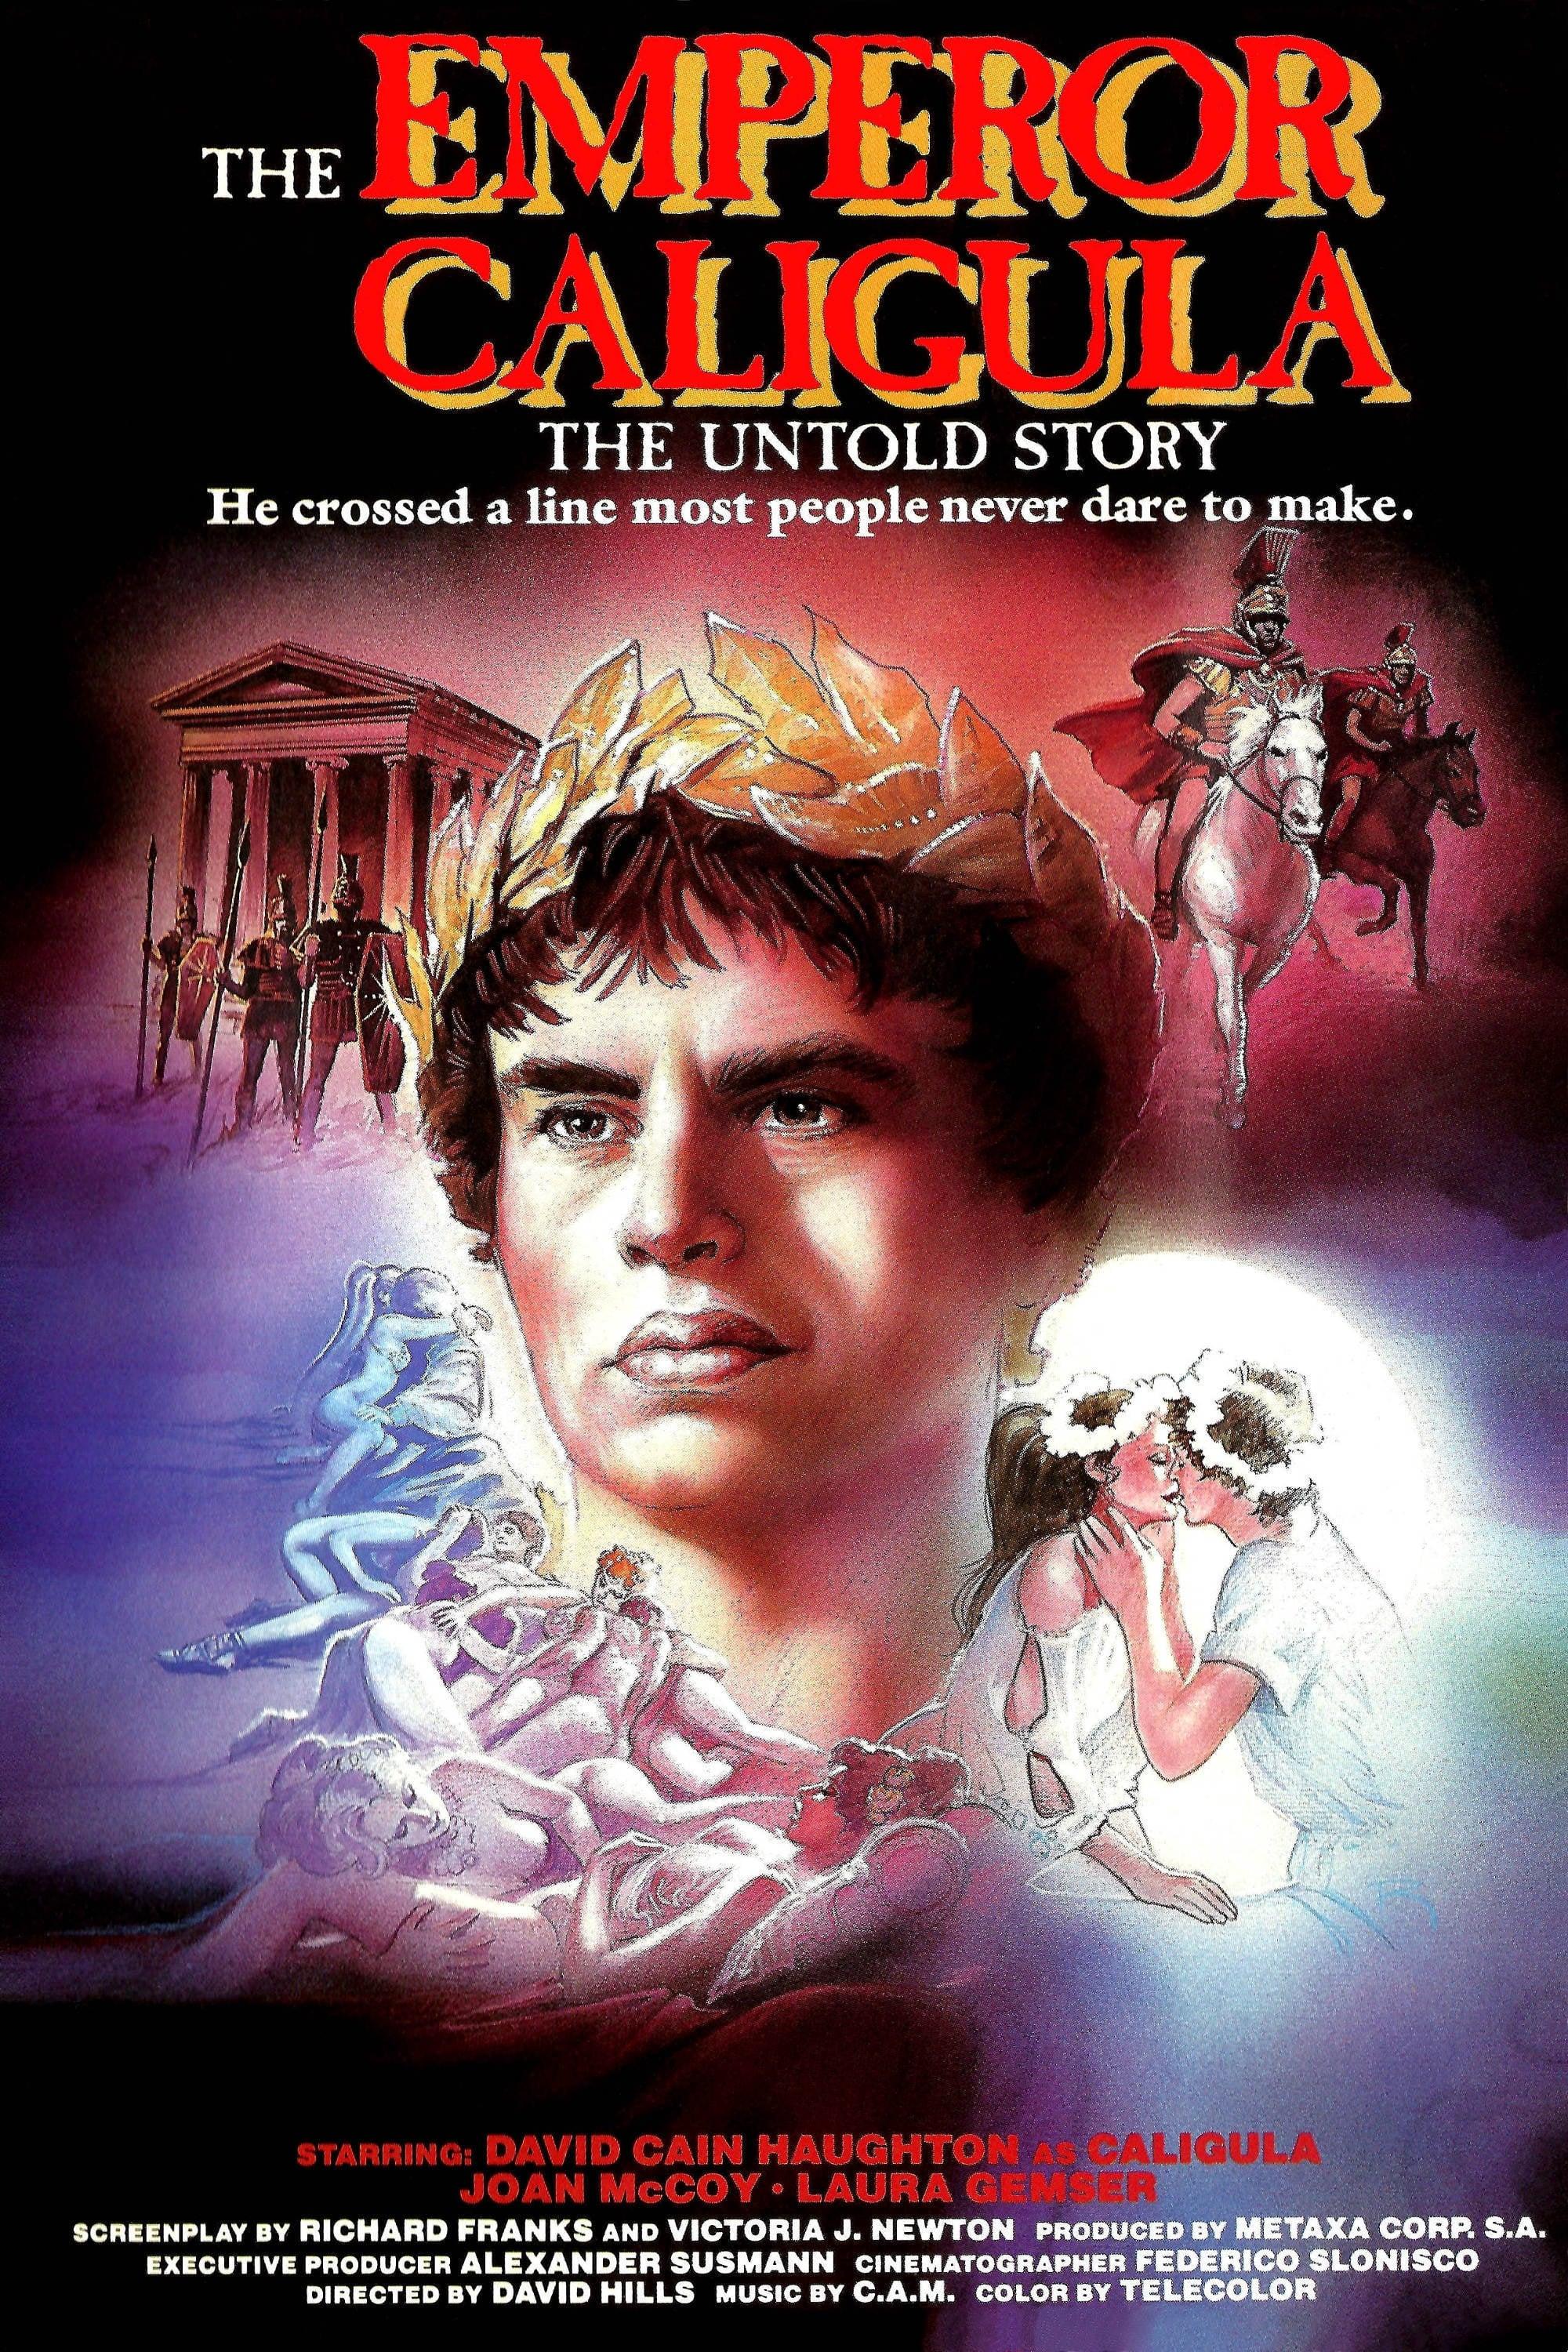 Caligula: The Untold Story poster